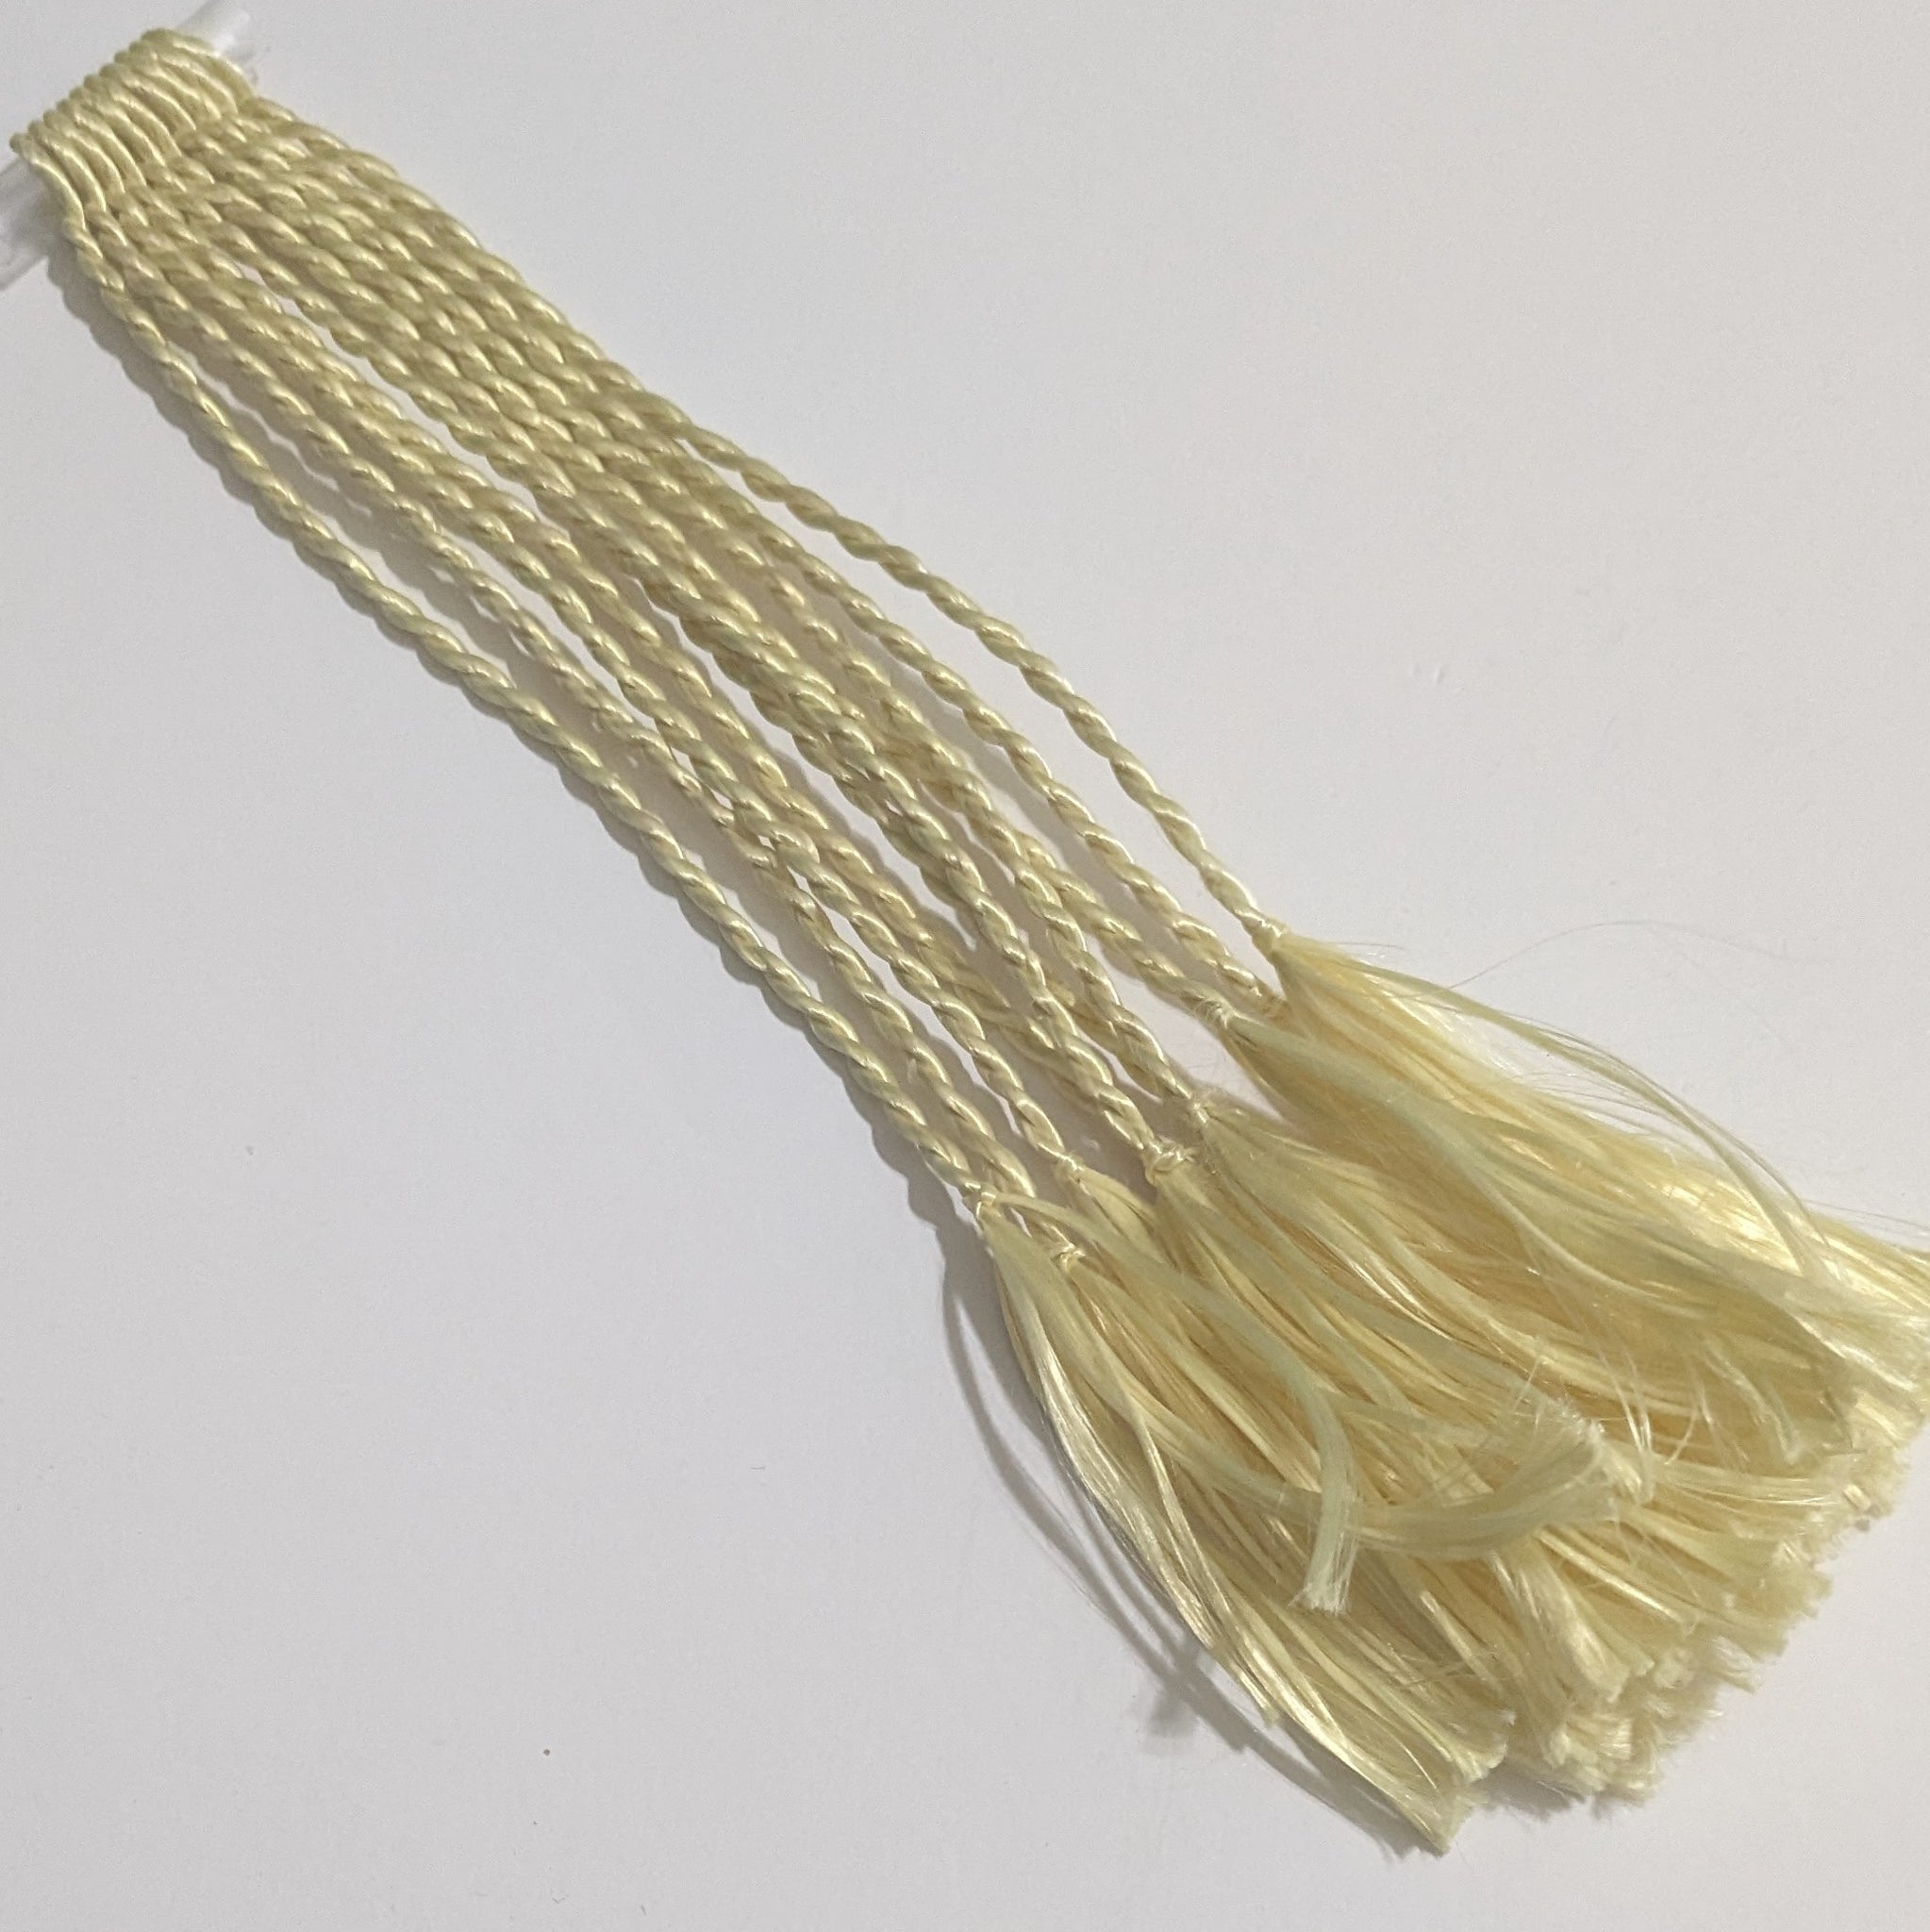 Hand Spun Crackers 10 pack created from Dupont Kevlar and other rugged Aramid and NOMEX fibers and threads